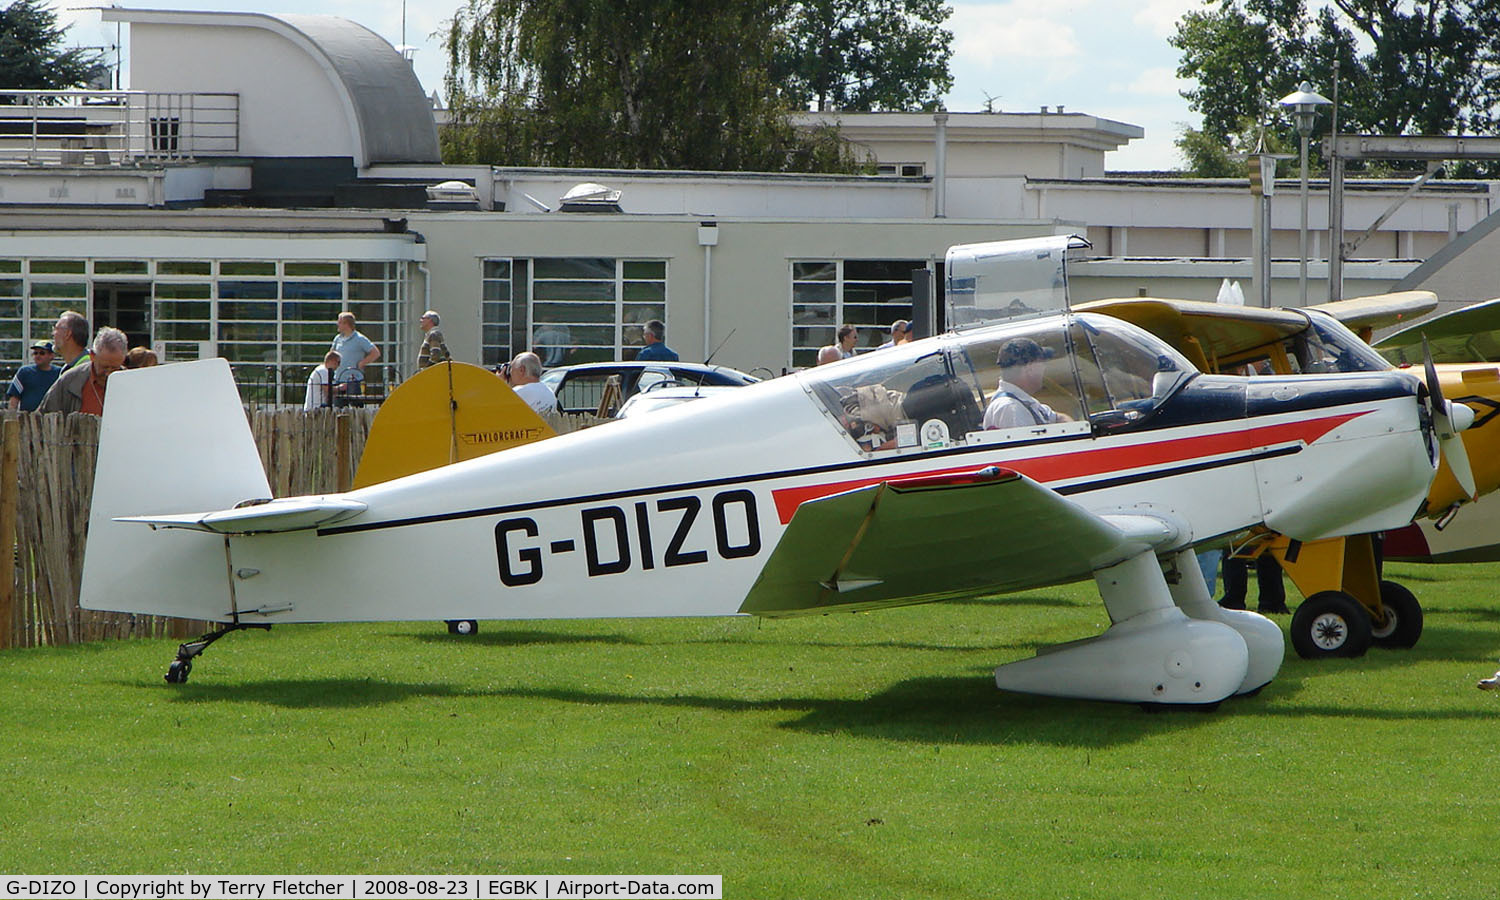 G-DIZO, 1965 Jodel D-120 Paris-Nice C/N 326, Visitor to Sywell on 2008 Ragwing Fly-in day